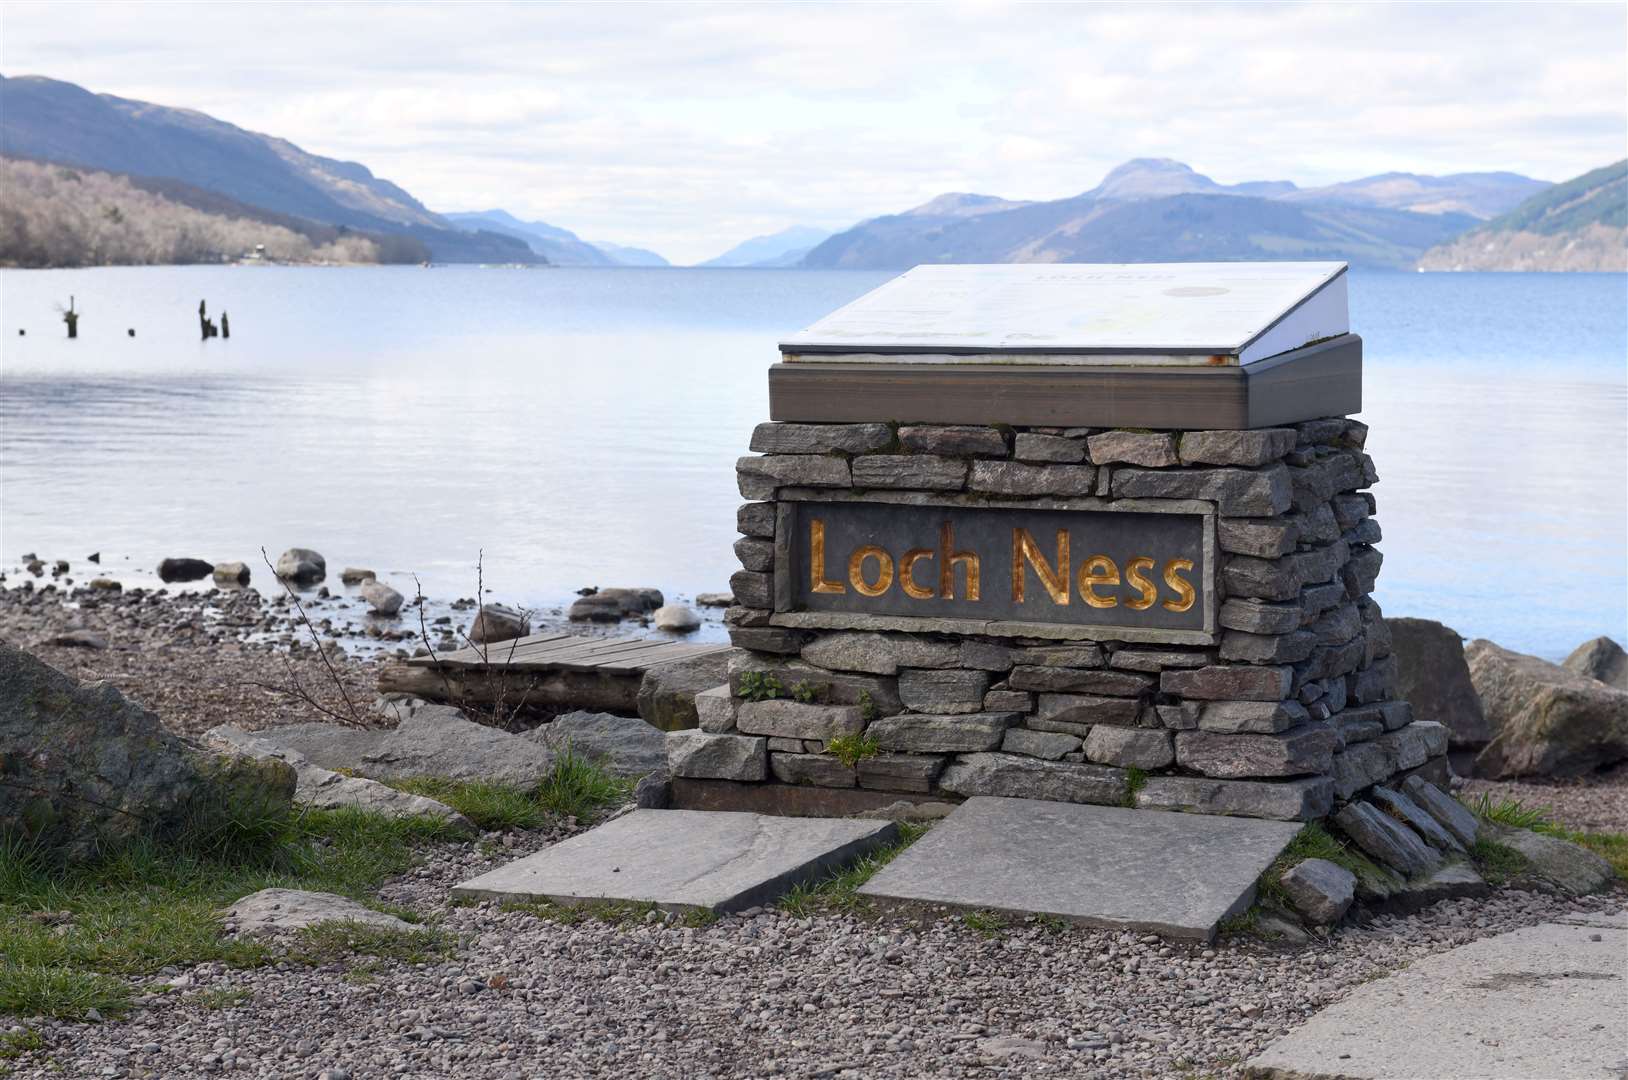 The cumulative impacts of multiple pump storage hydro schemes on Loch Ness are not understood, say campaigners.